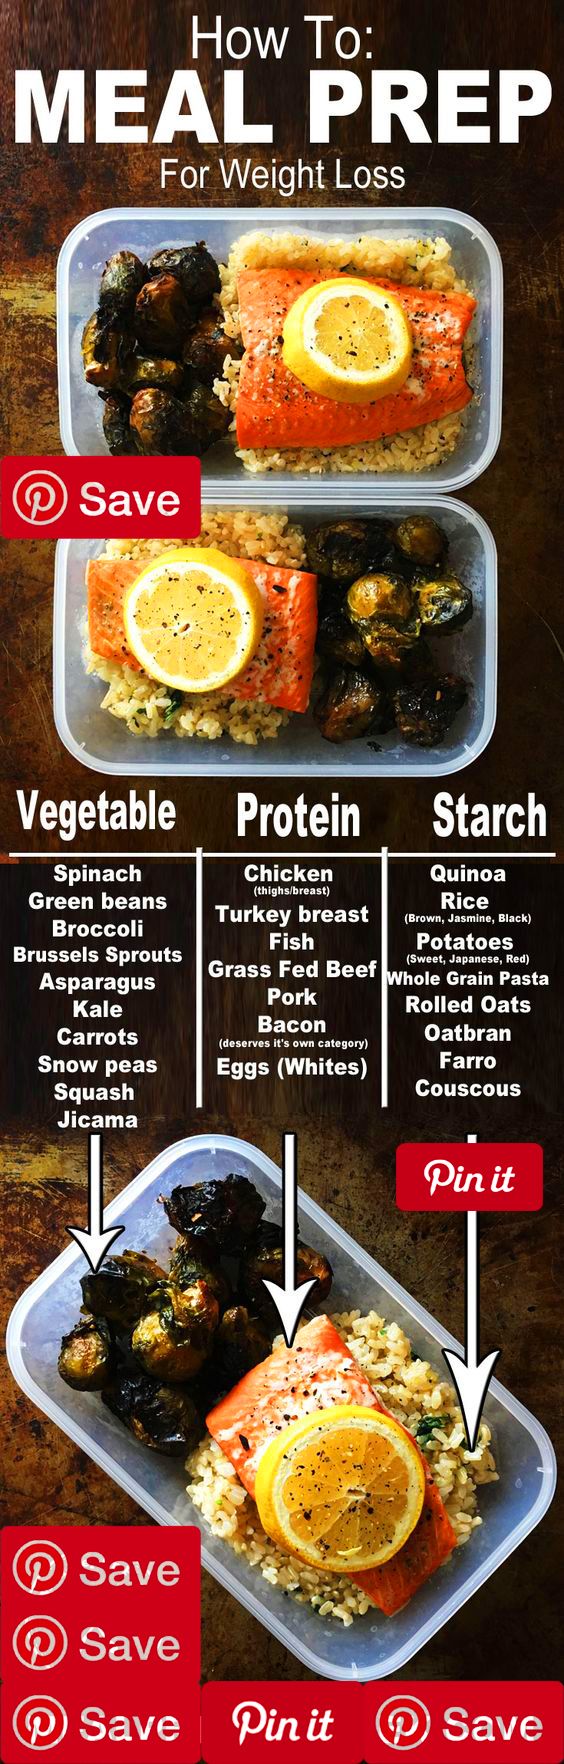 Meal Prep 101 For Beginners How To Meal Prep : The Perfect 3 Ingredient Meal Prep Template Step 1: Plan Your Meals Make sure each